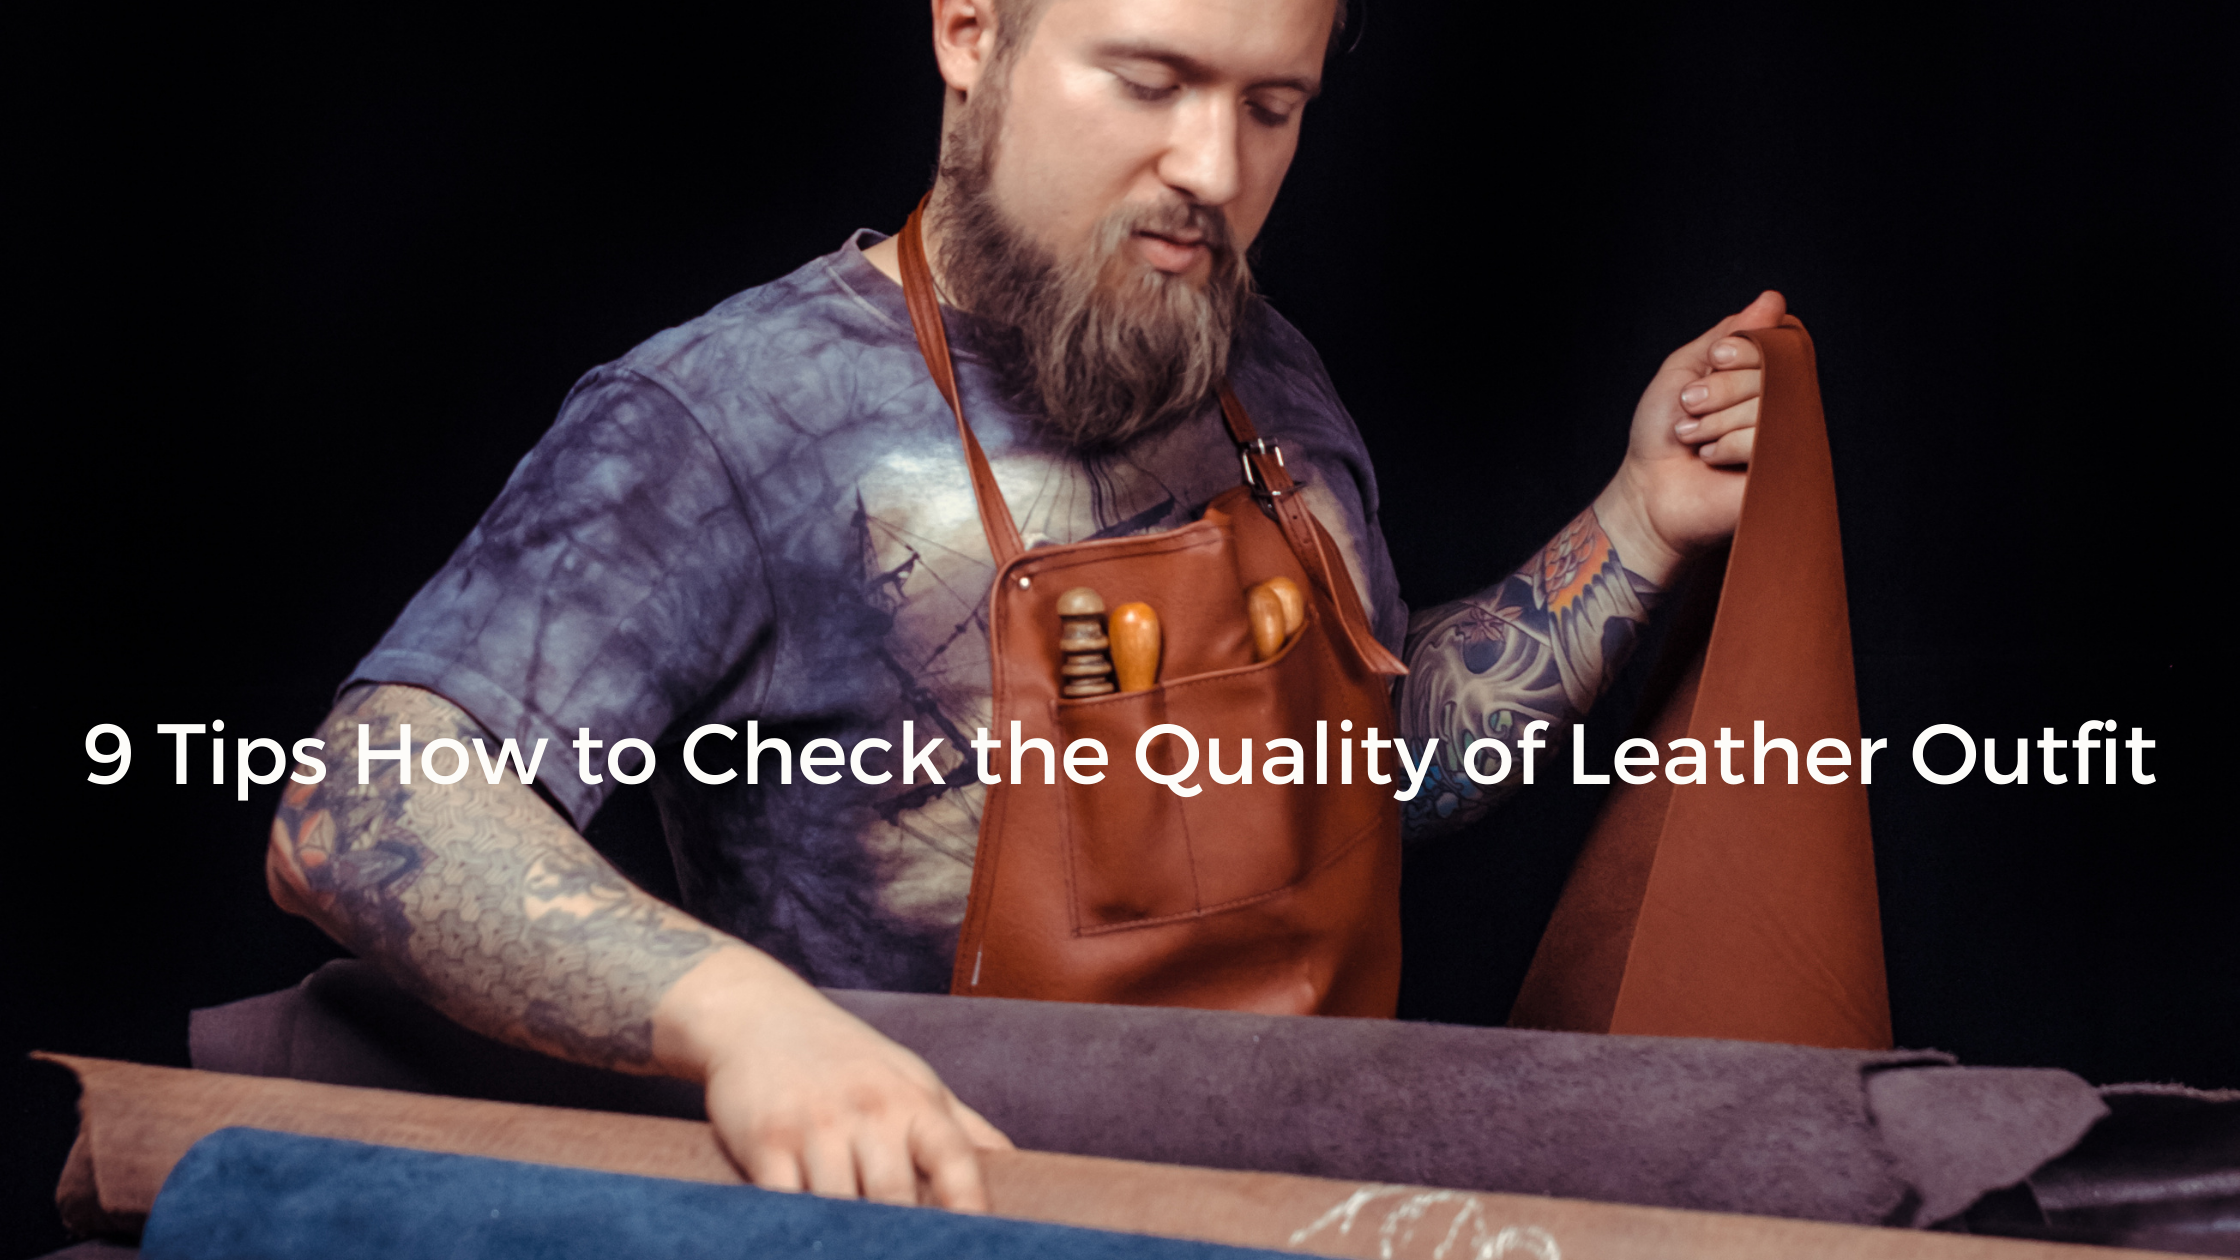 9 Tips How to Check the Quality of Leather Outfit